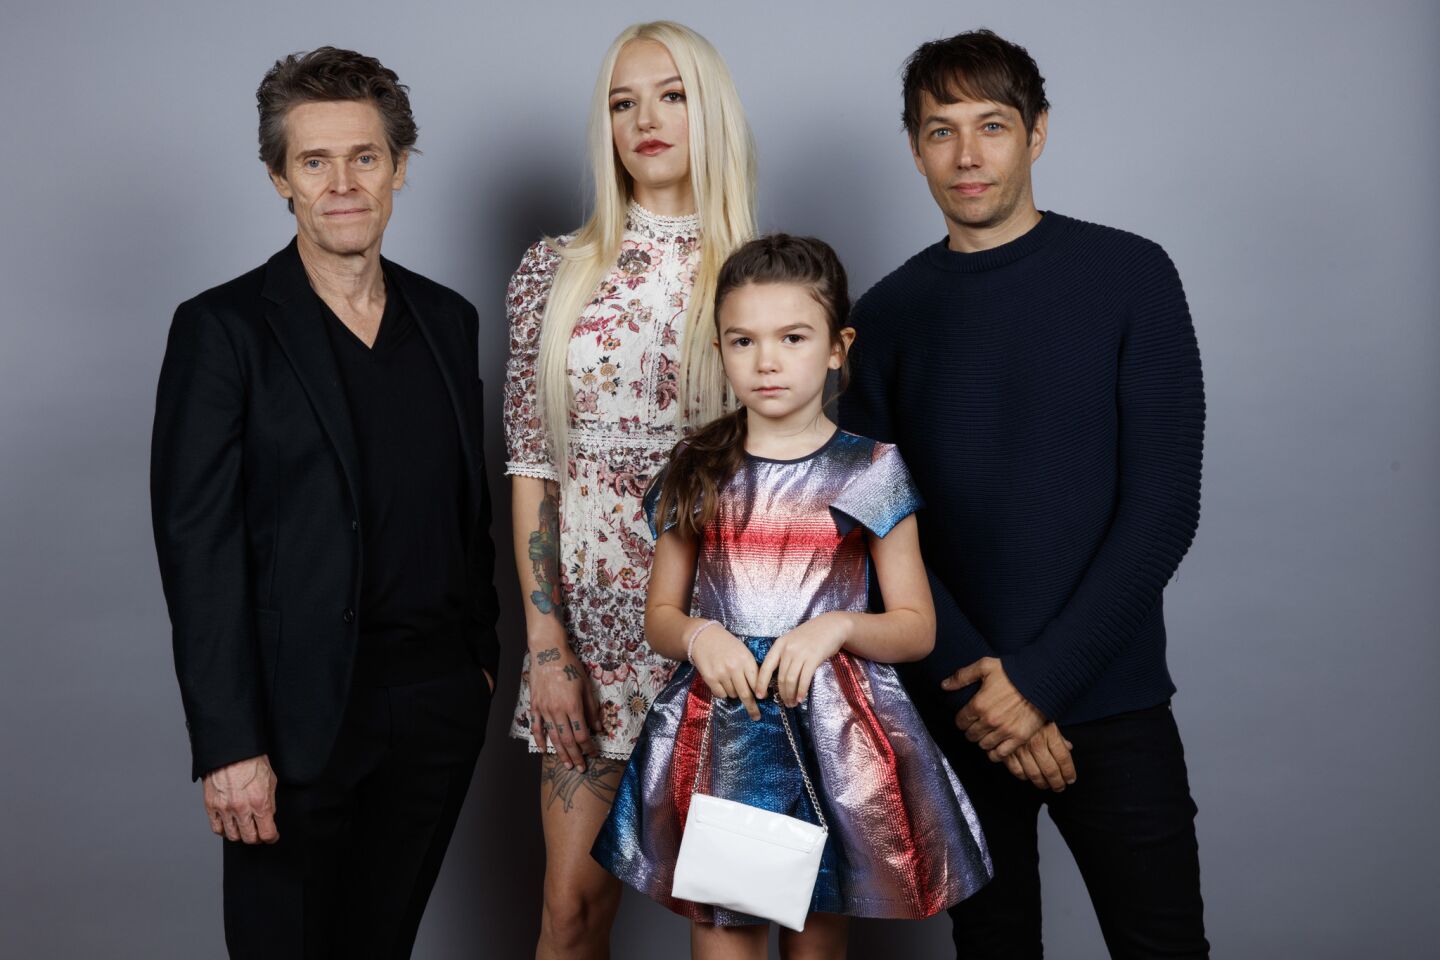 Willem Dafoe, left, Bria Binaite, Brooklynn Prince, and director Sean Baker from the film "The Florida Project."